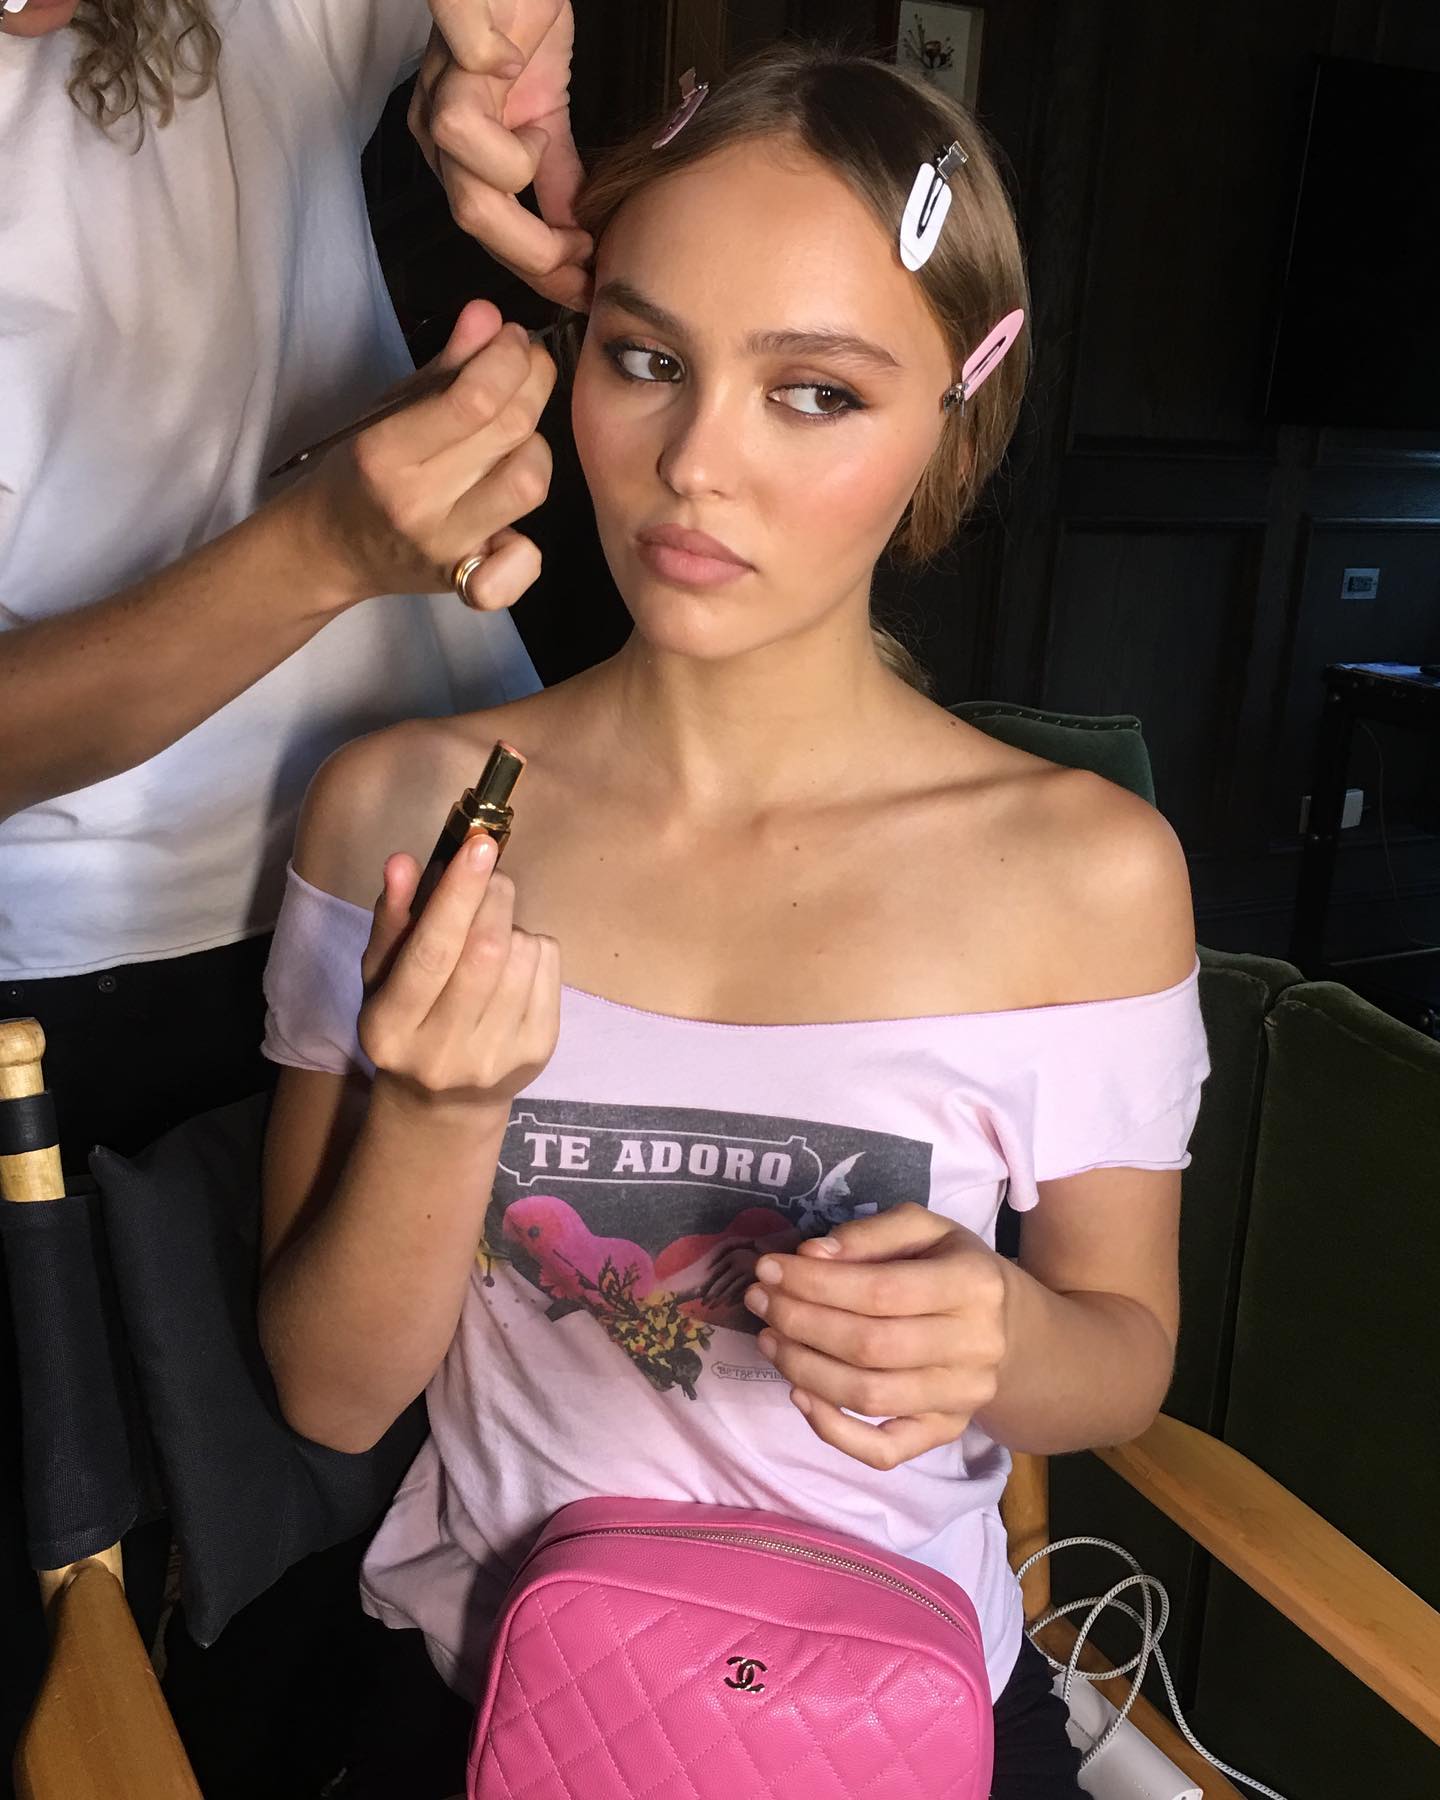 We've Uncovered Every Makeup Product Lily-Rose Depp Uses